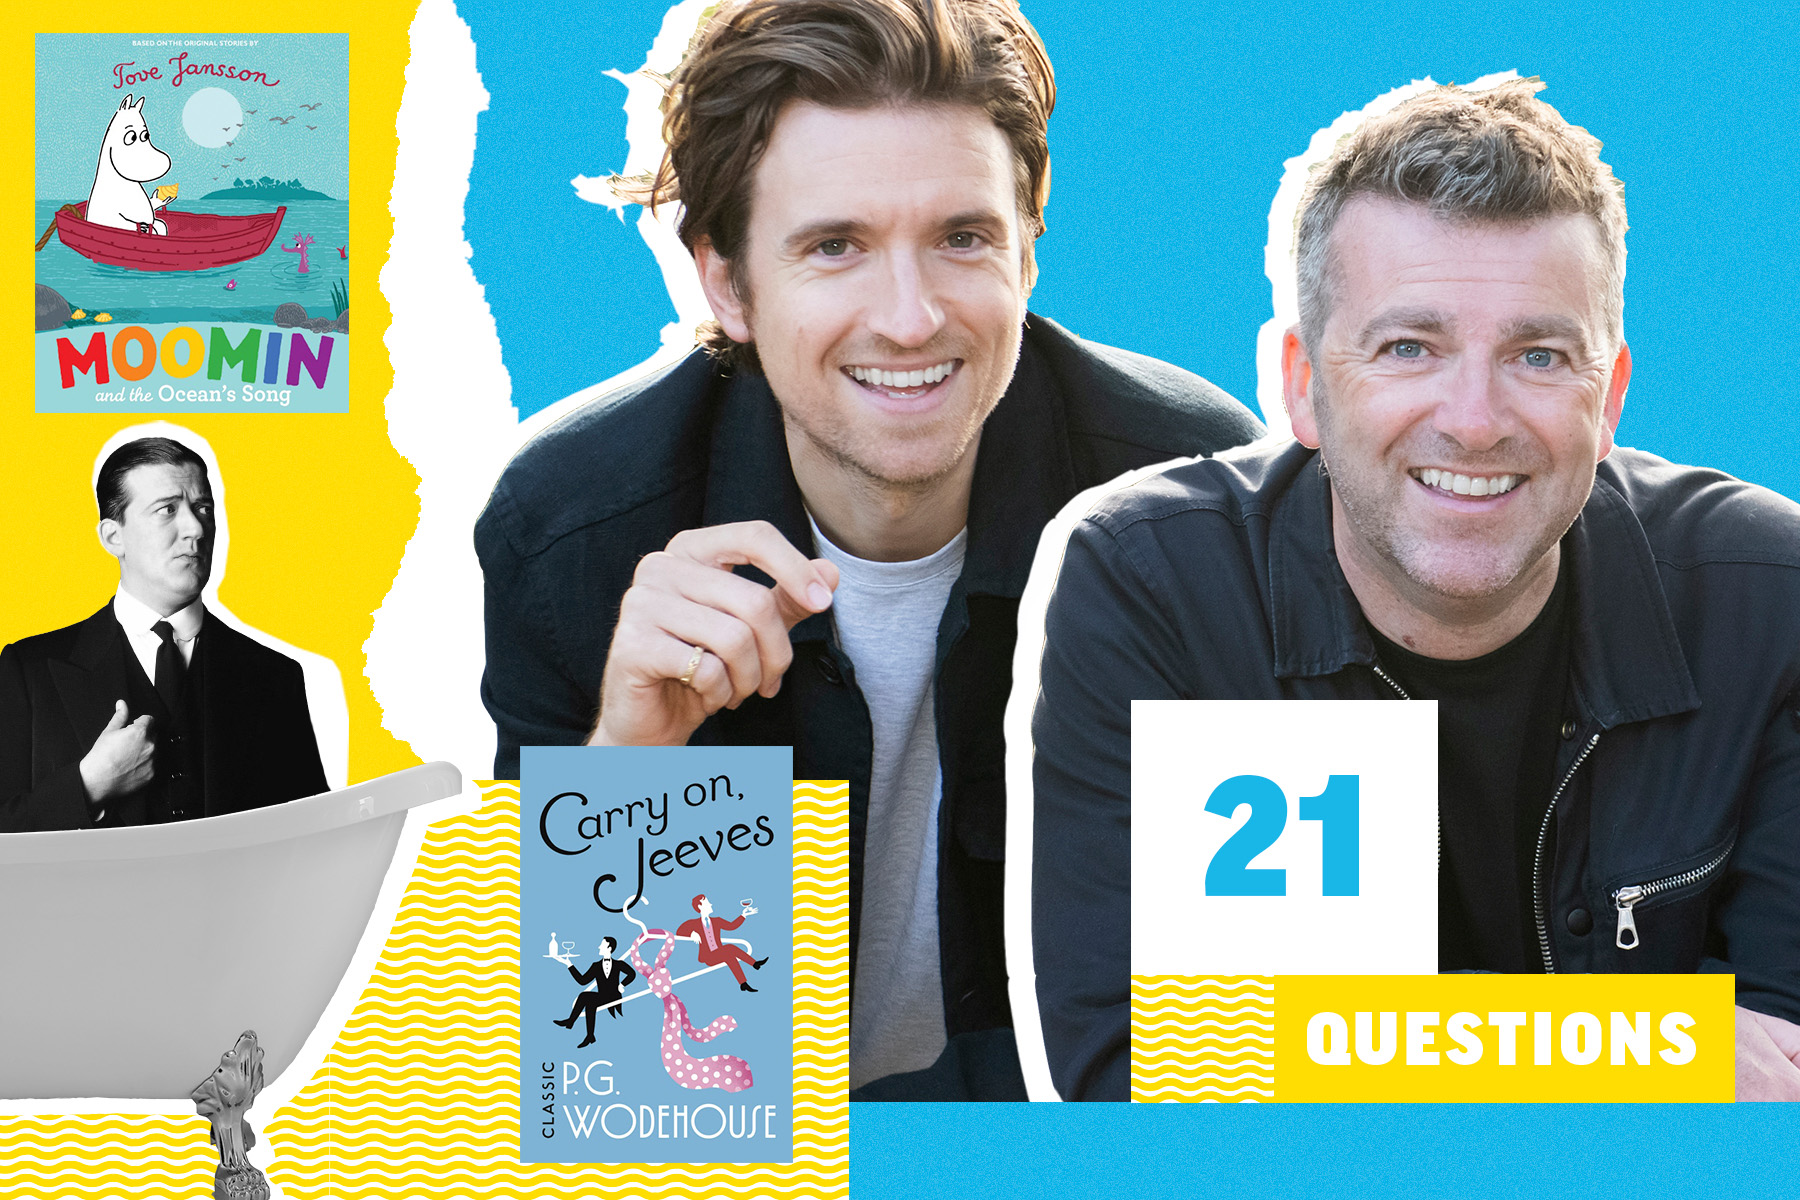 A photo of authors Greg James and Chris Smith on a blue and yellow, scrapbook type background with a picture Stephen Fry as Jeeves in a bathtub, in between Moomin book by Tove Jansson and Carry on Jeeves by P. G. Wodehouse